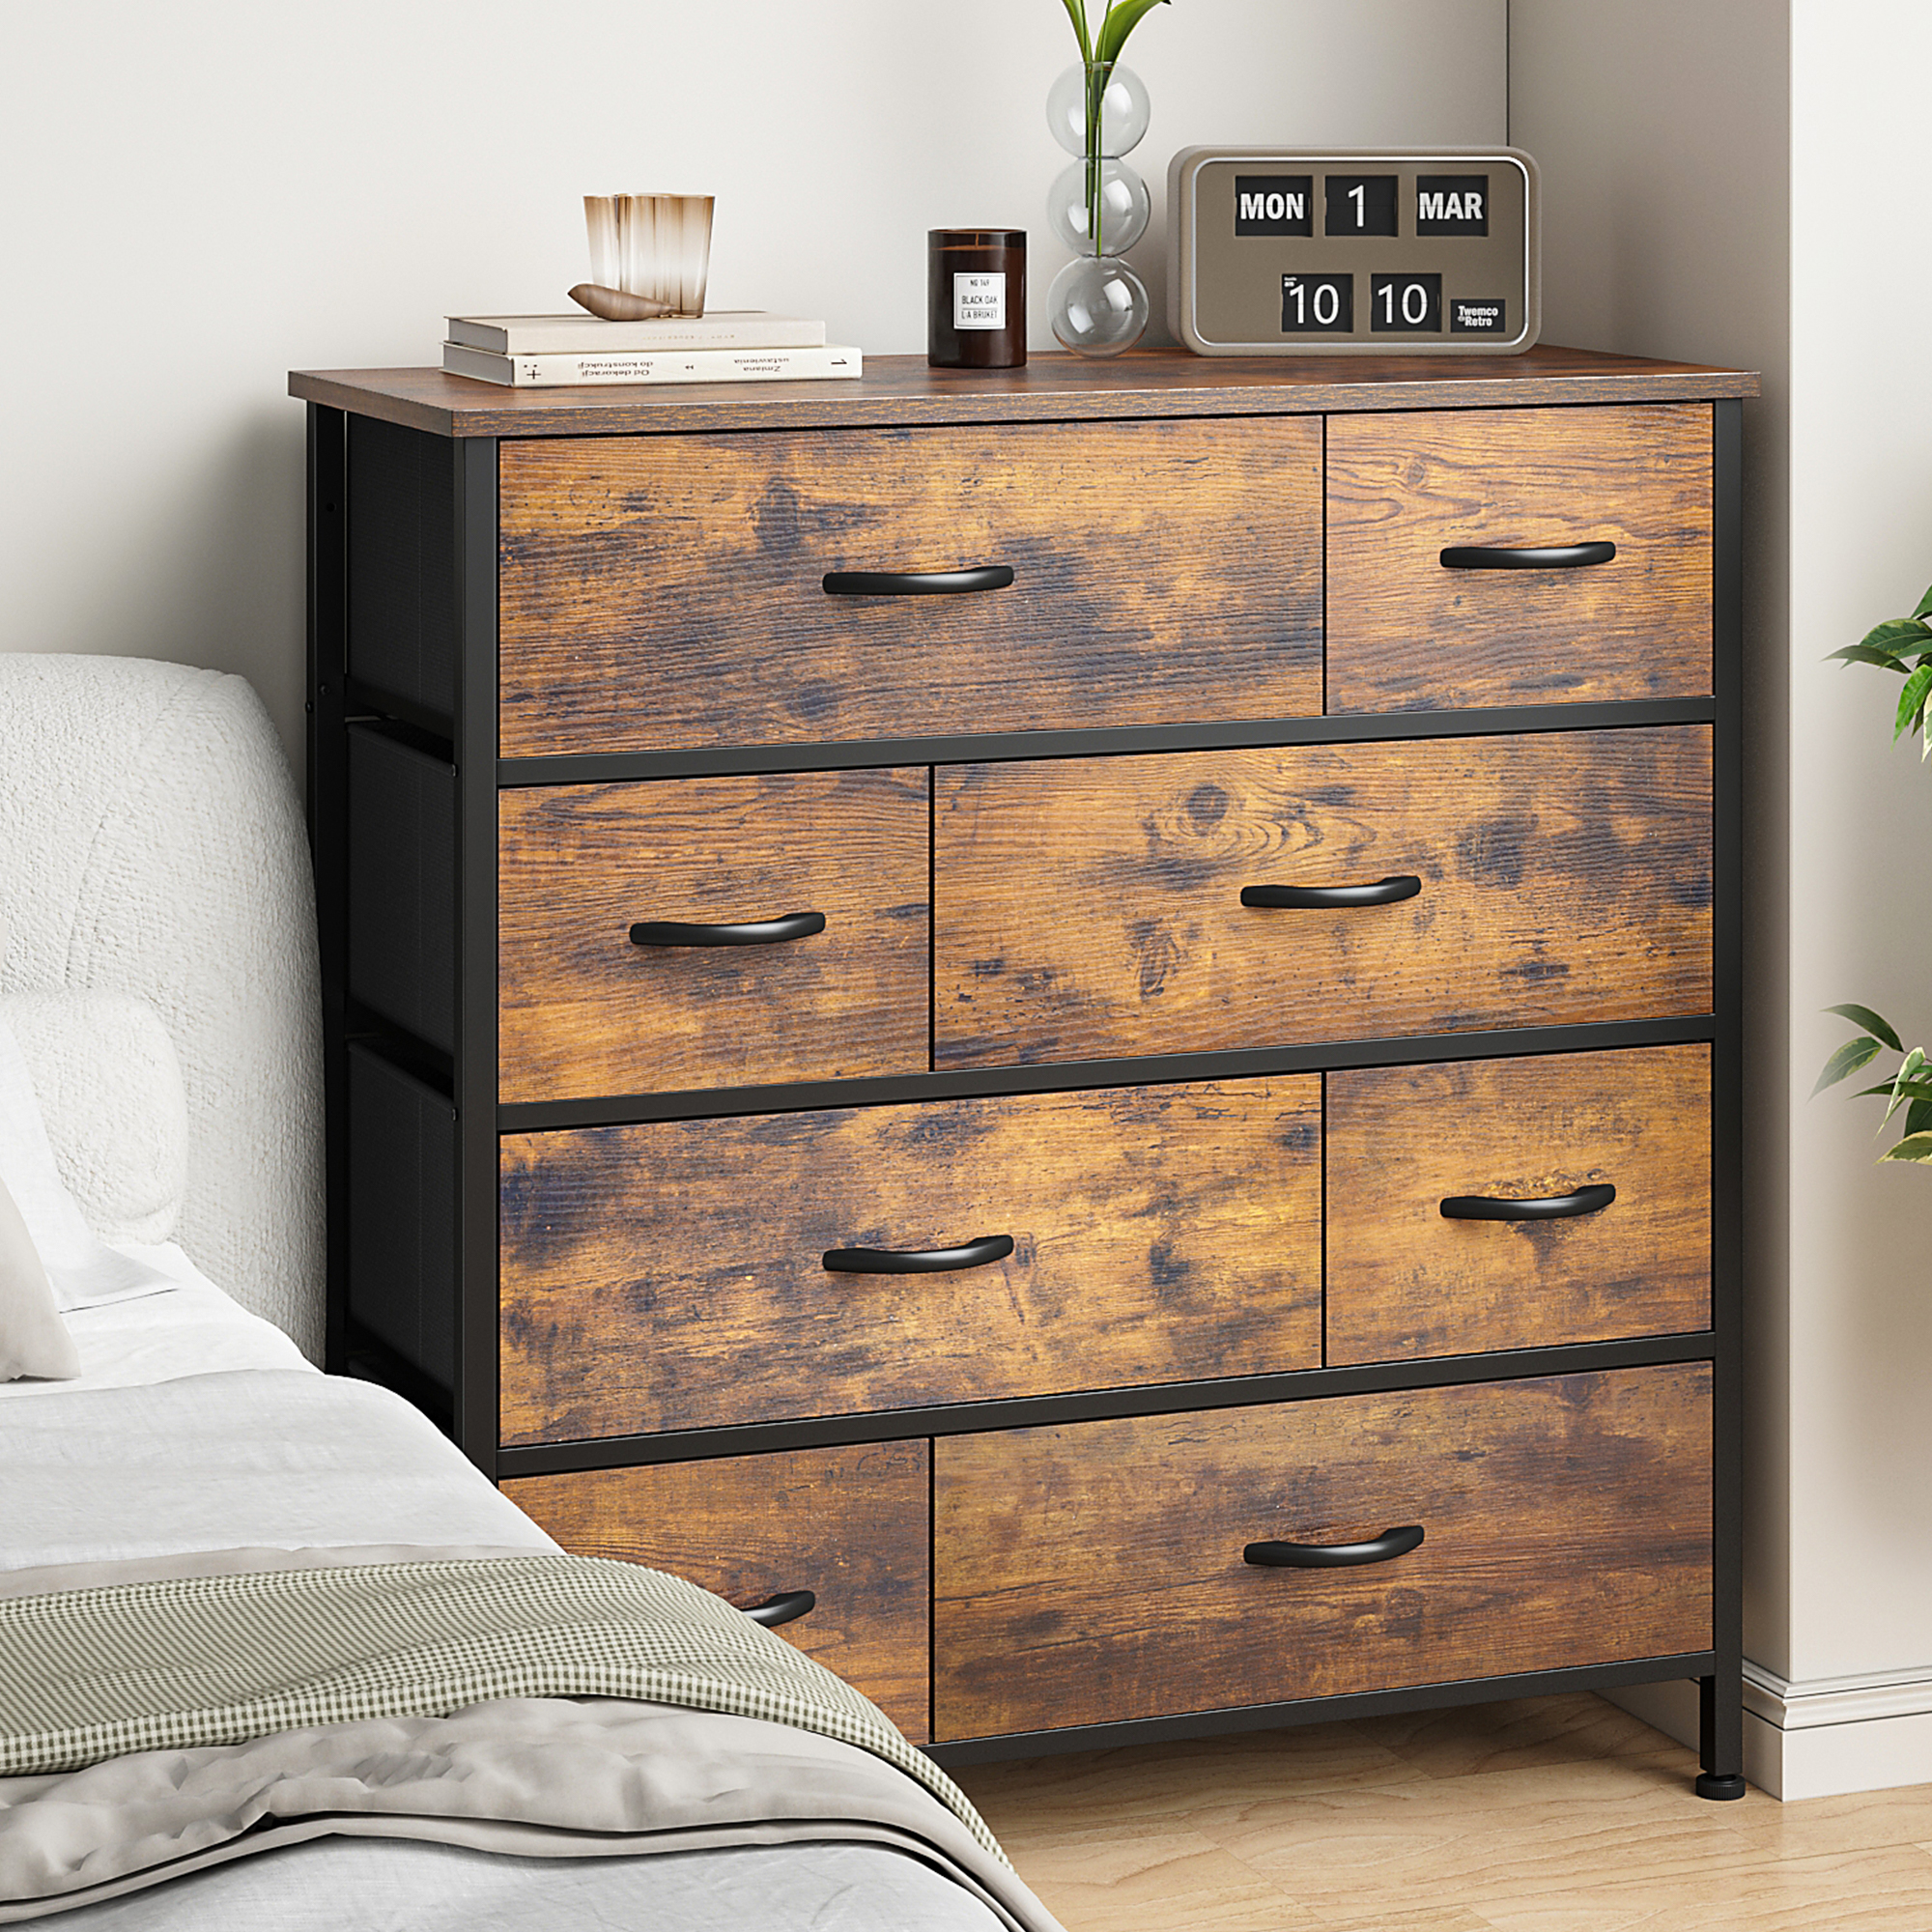 EnHomee 8 Drawer Bedroom Dresser for Storage Dressers&Chects of Drawers with Wooden veneer drawer and Wood Top, Dressers for bedroom Living room Kids' room, Rustic Brown - image 1 of 15